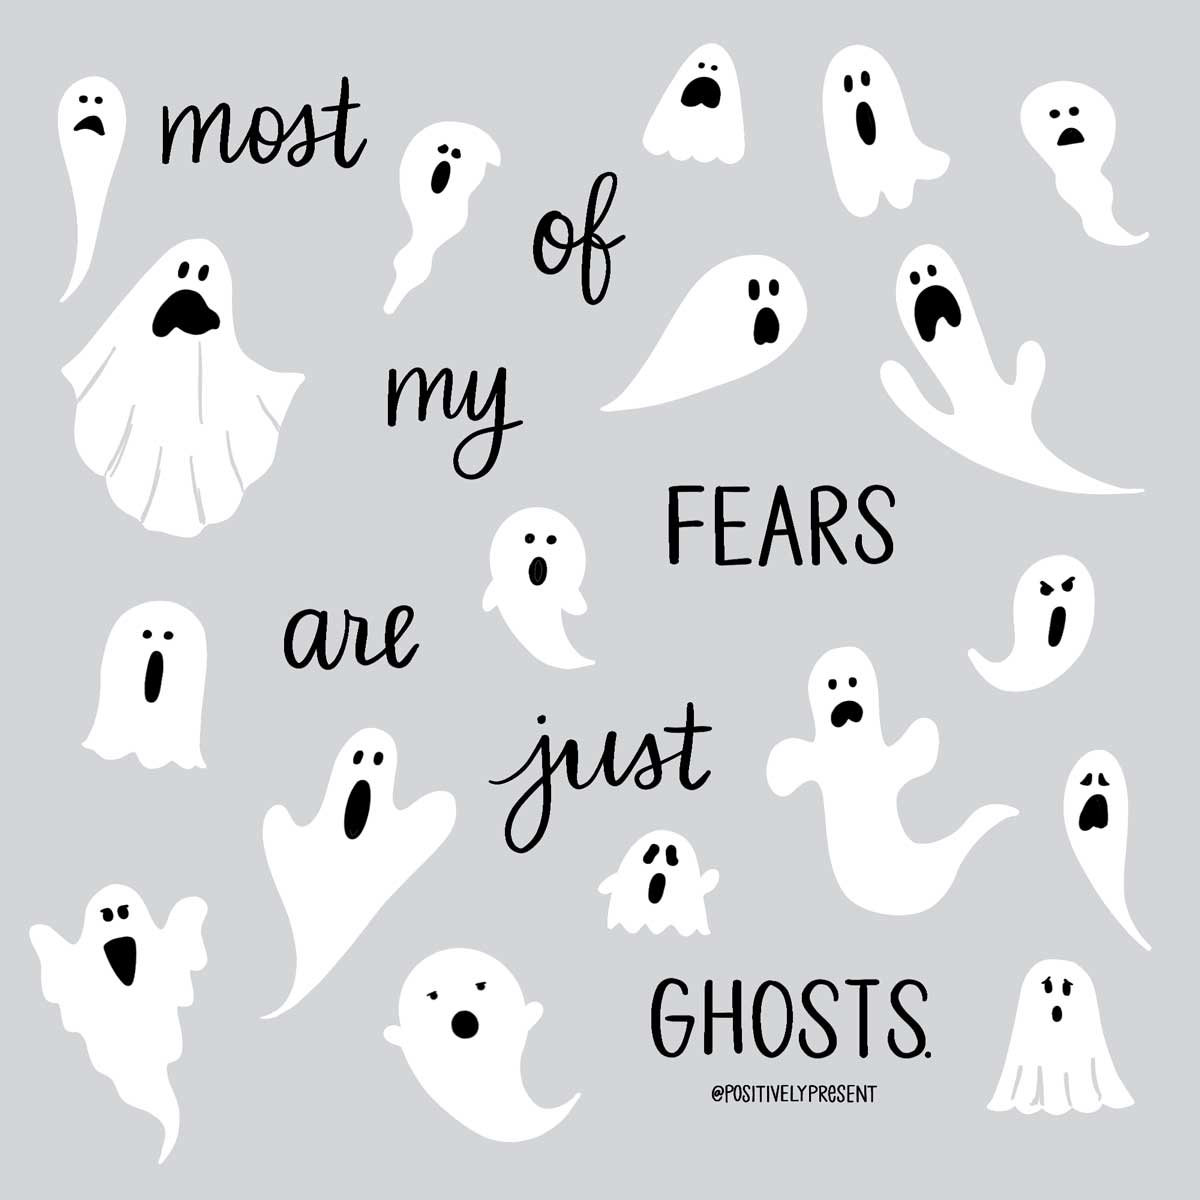 funny ghost drawings has quote most of my fears are just ghosts.